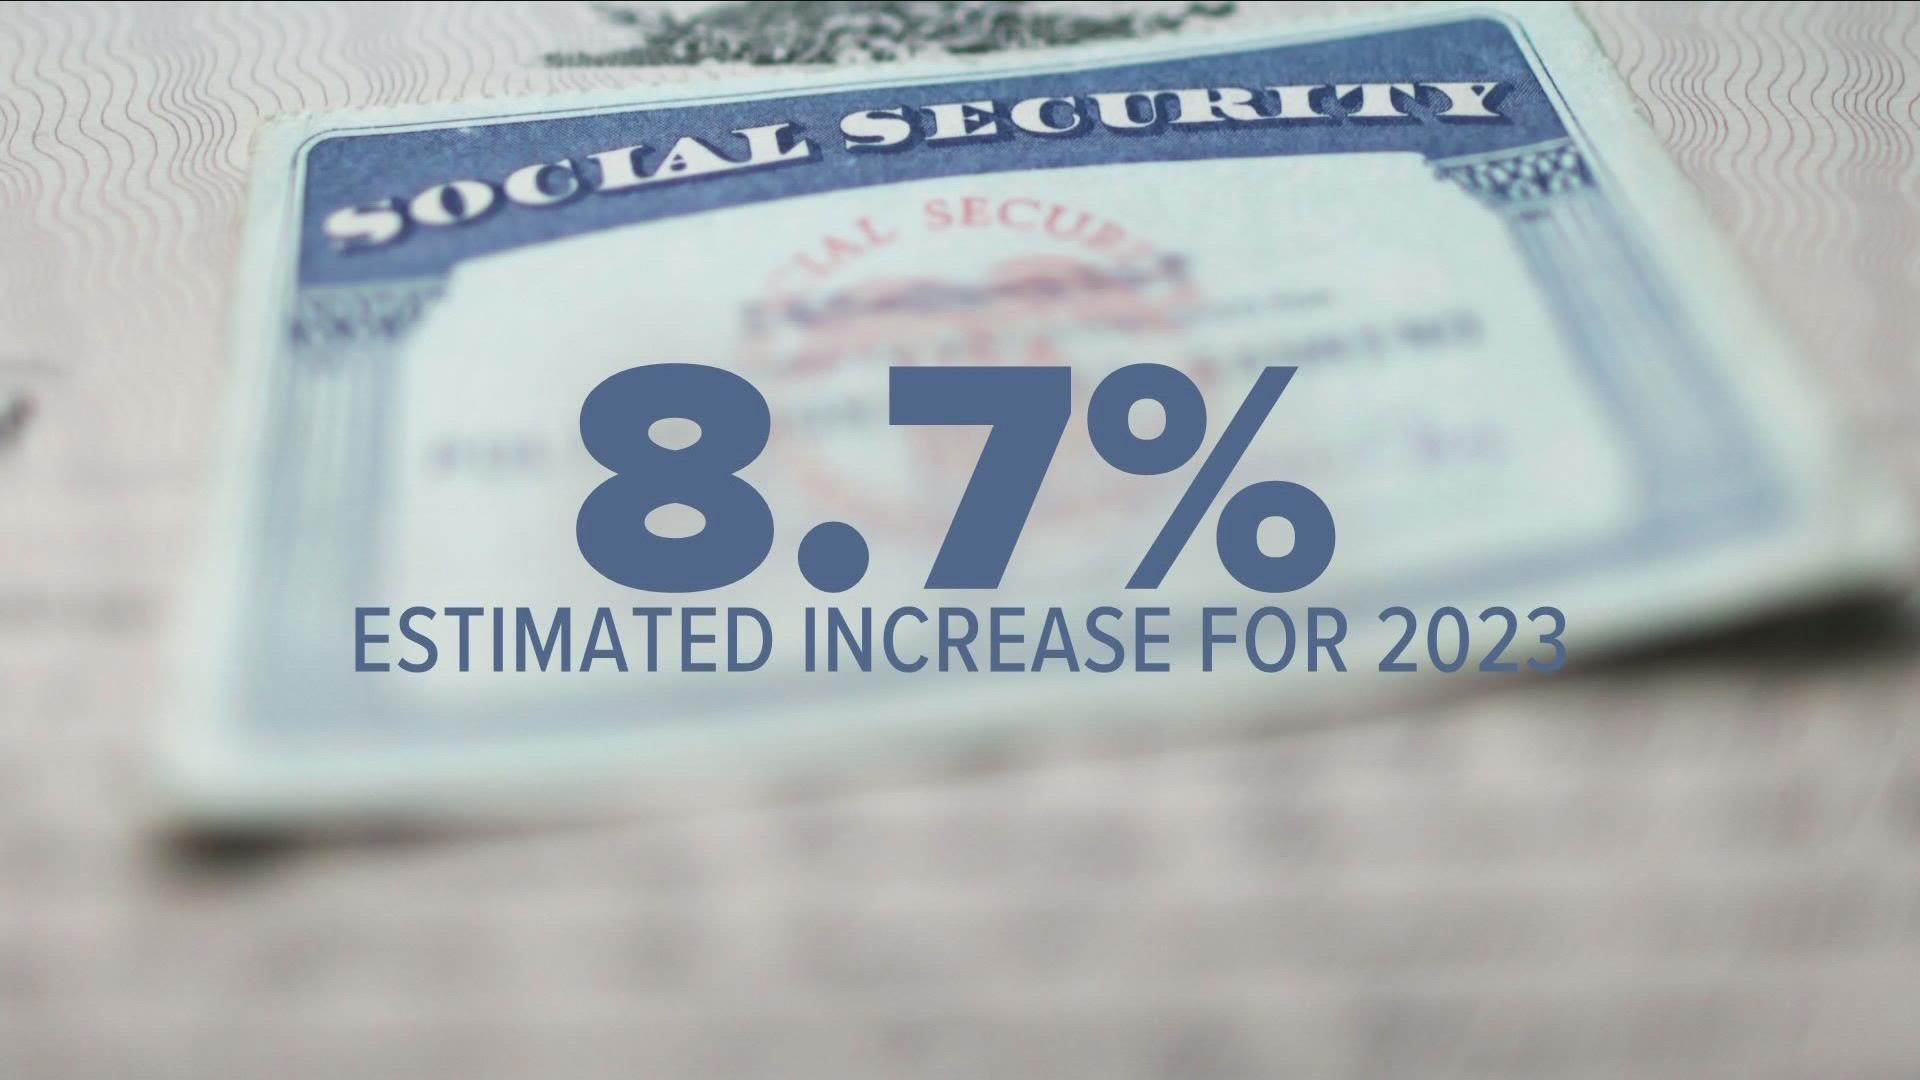 The cost-of-living adjustment for social security is expected to be announced on Thursday ... and could be as much as 8.7% or around $145 extra.